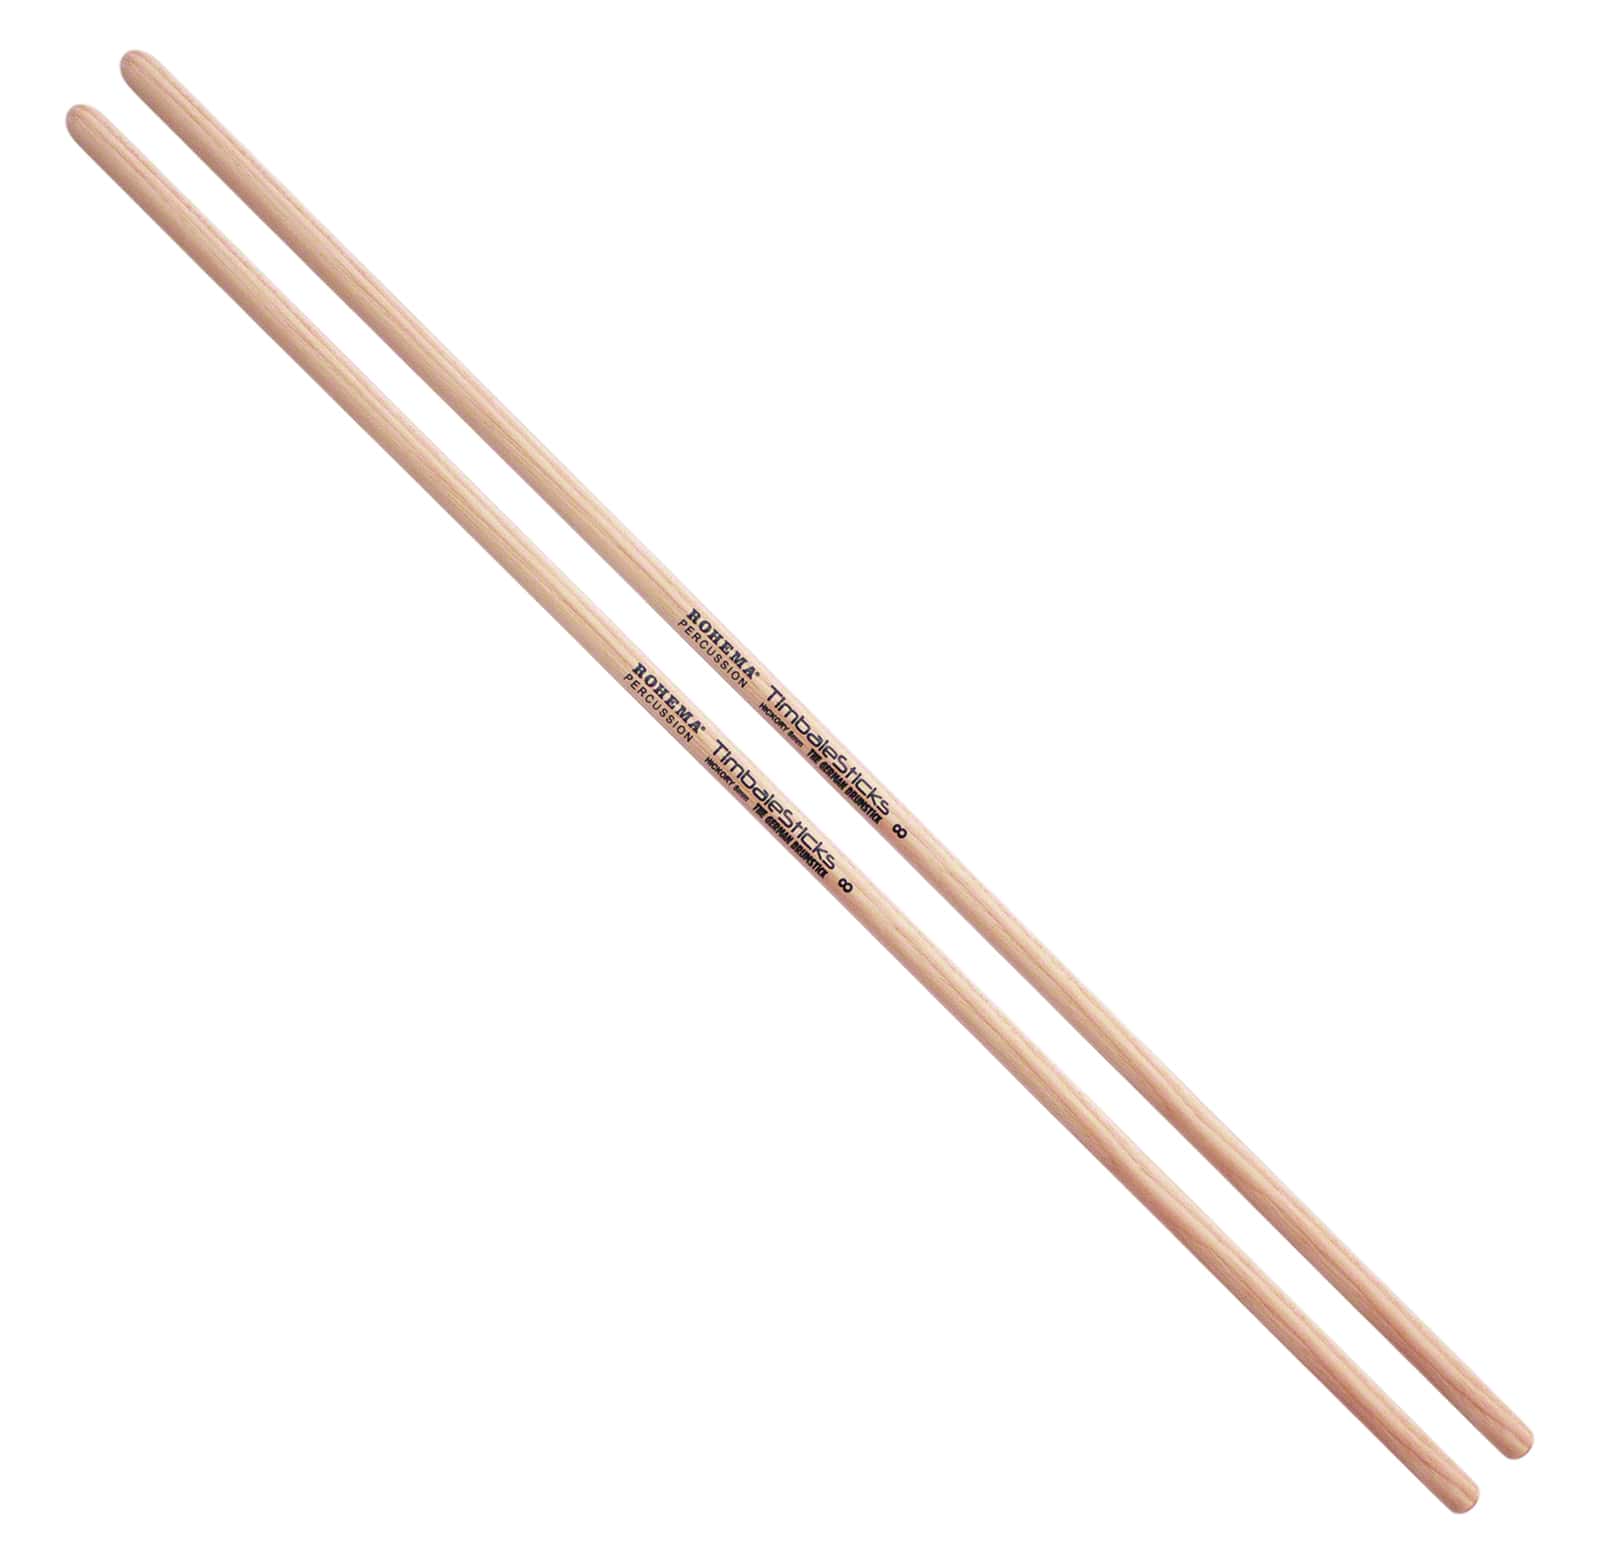 ROHEMA BAGUETTES TIMBALES LATINES 8MM HICKORY